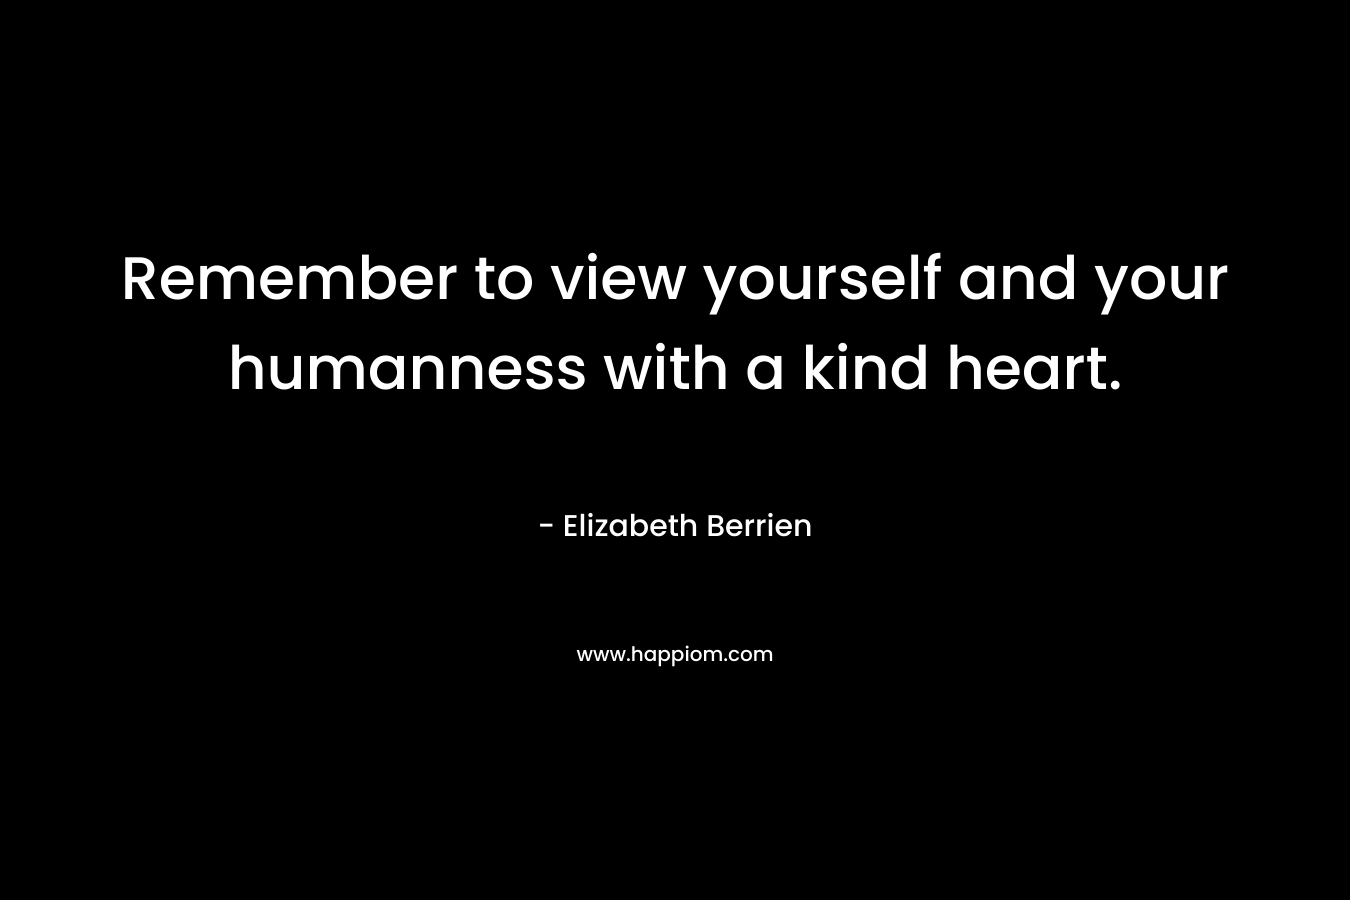 Remember to view yourself and your humanness with a kind heart.